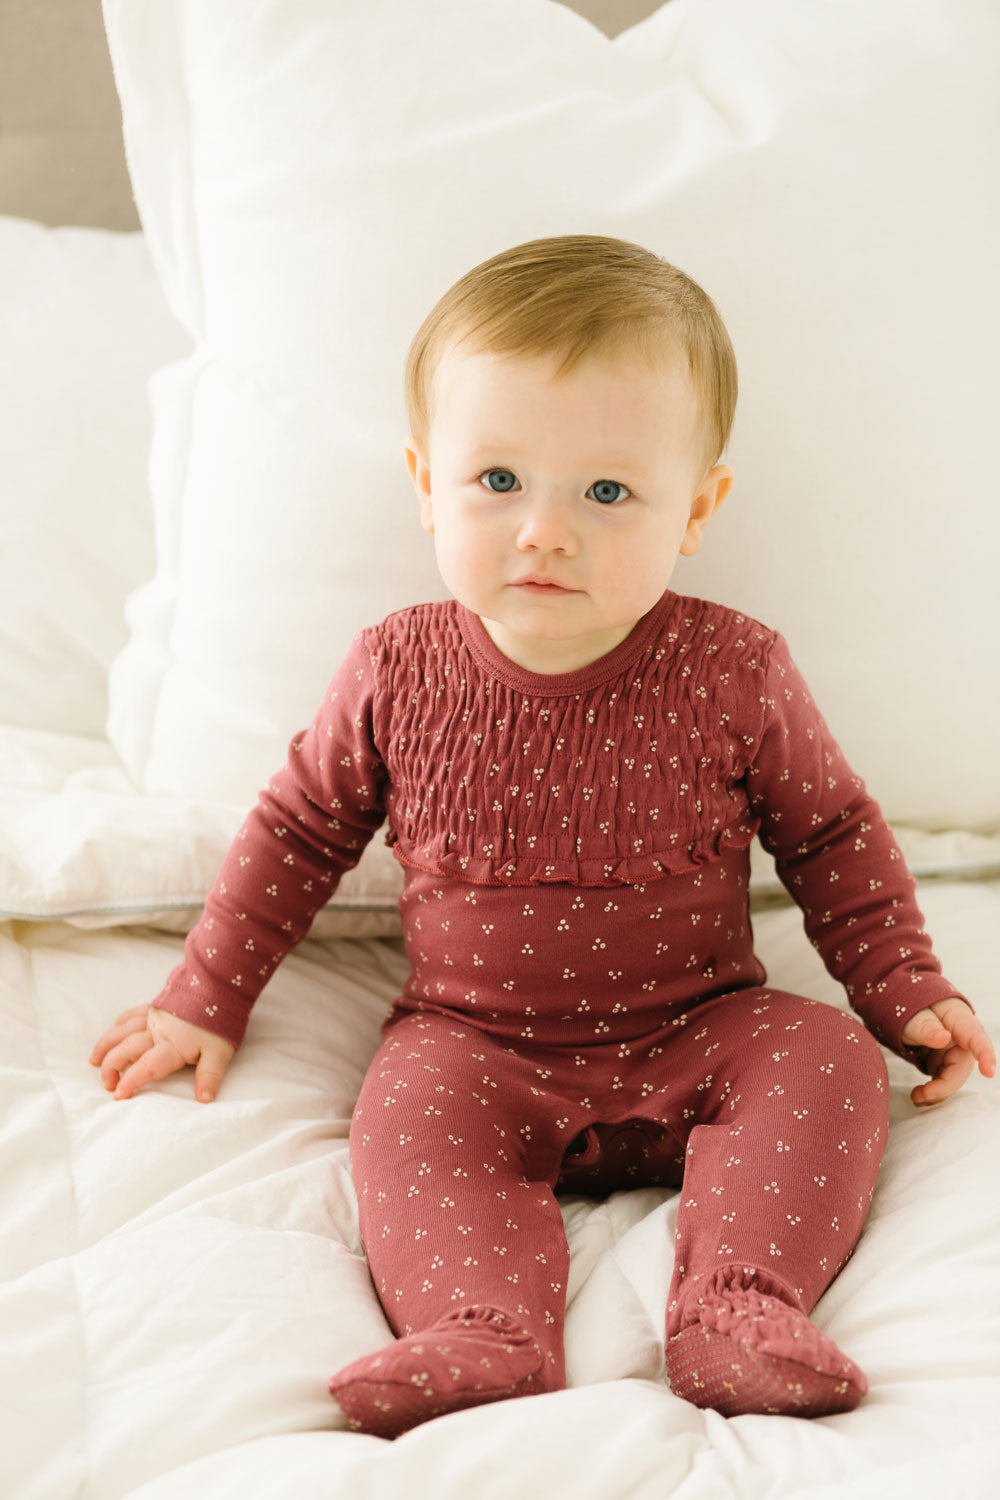 L'ovedbaby Organic Smocked Baby Footie - Appleberry Dots